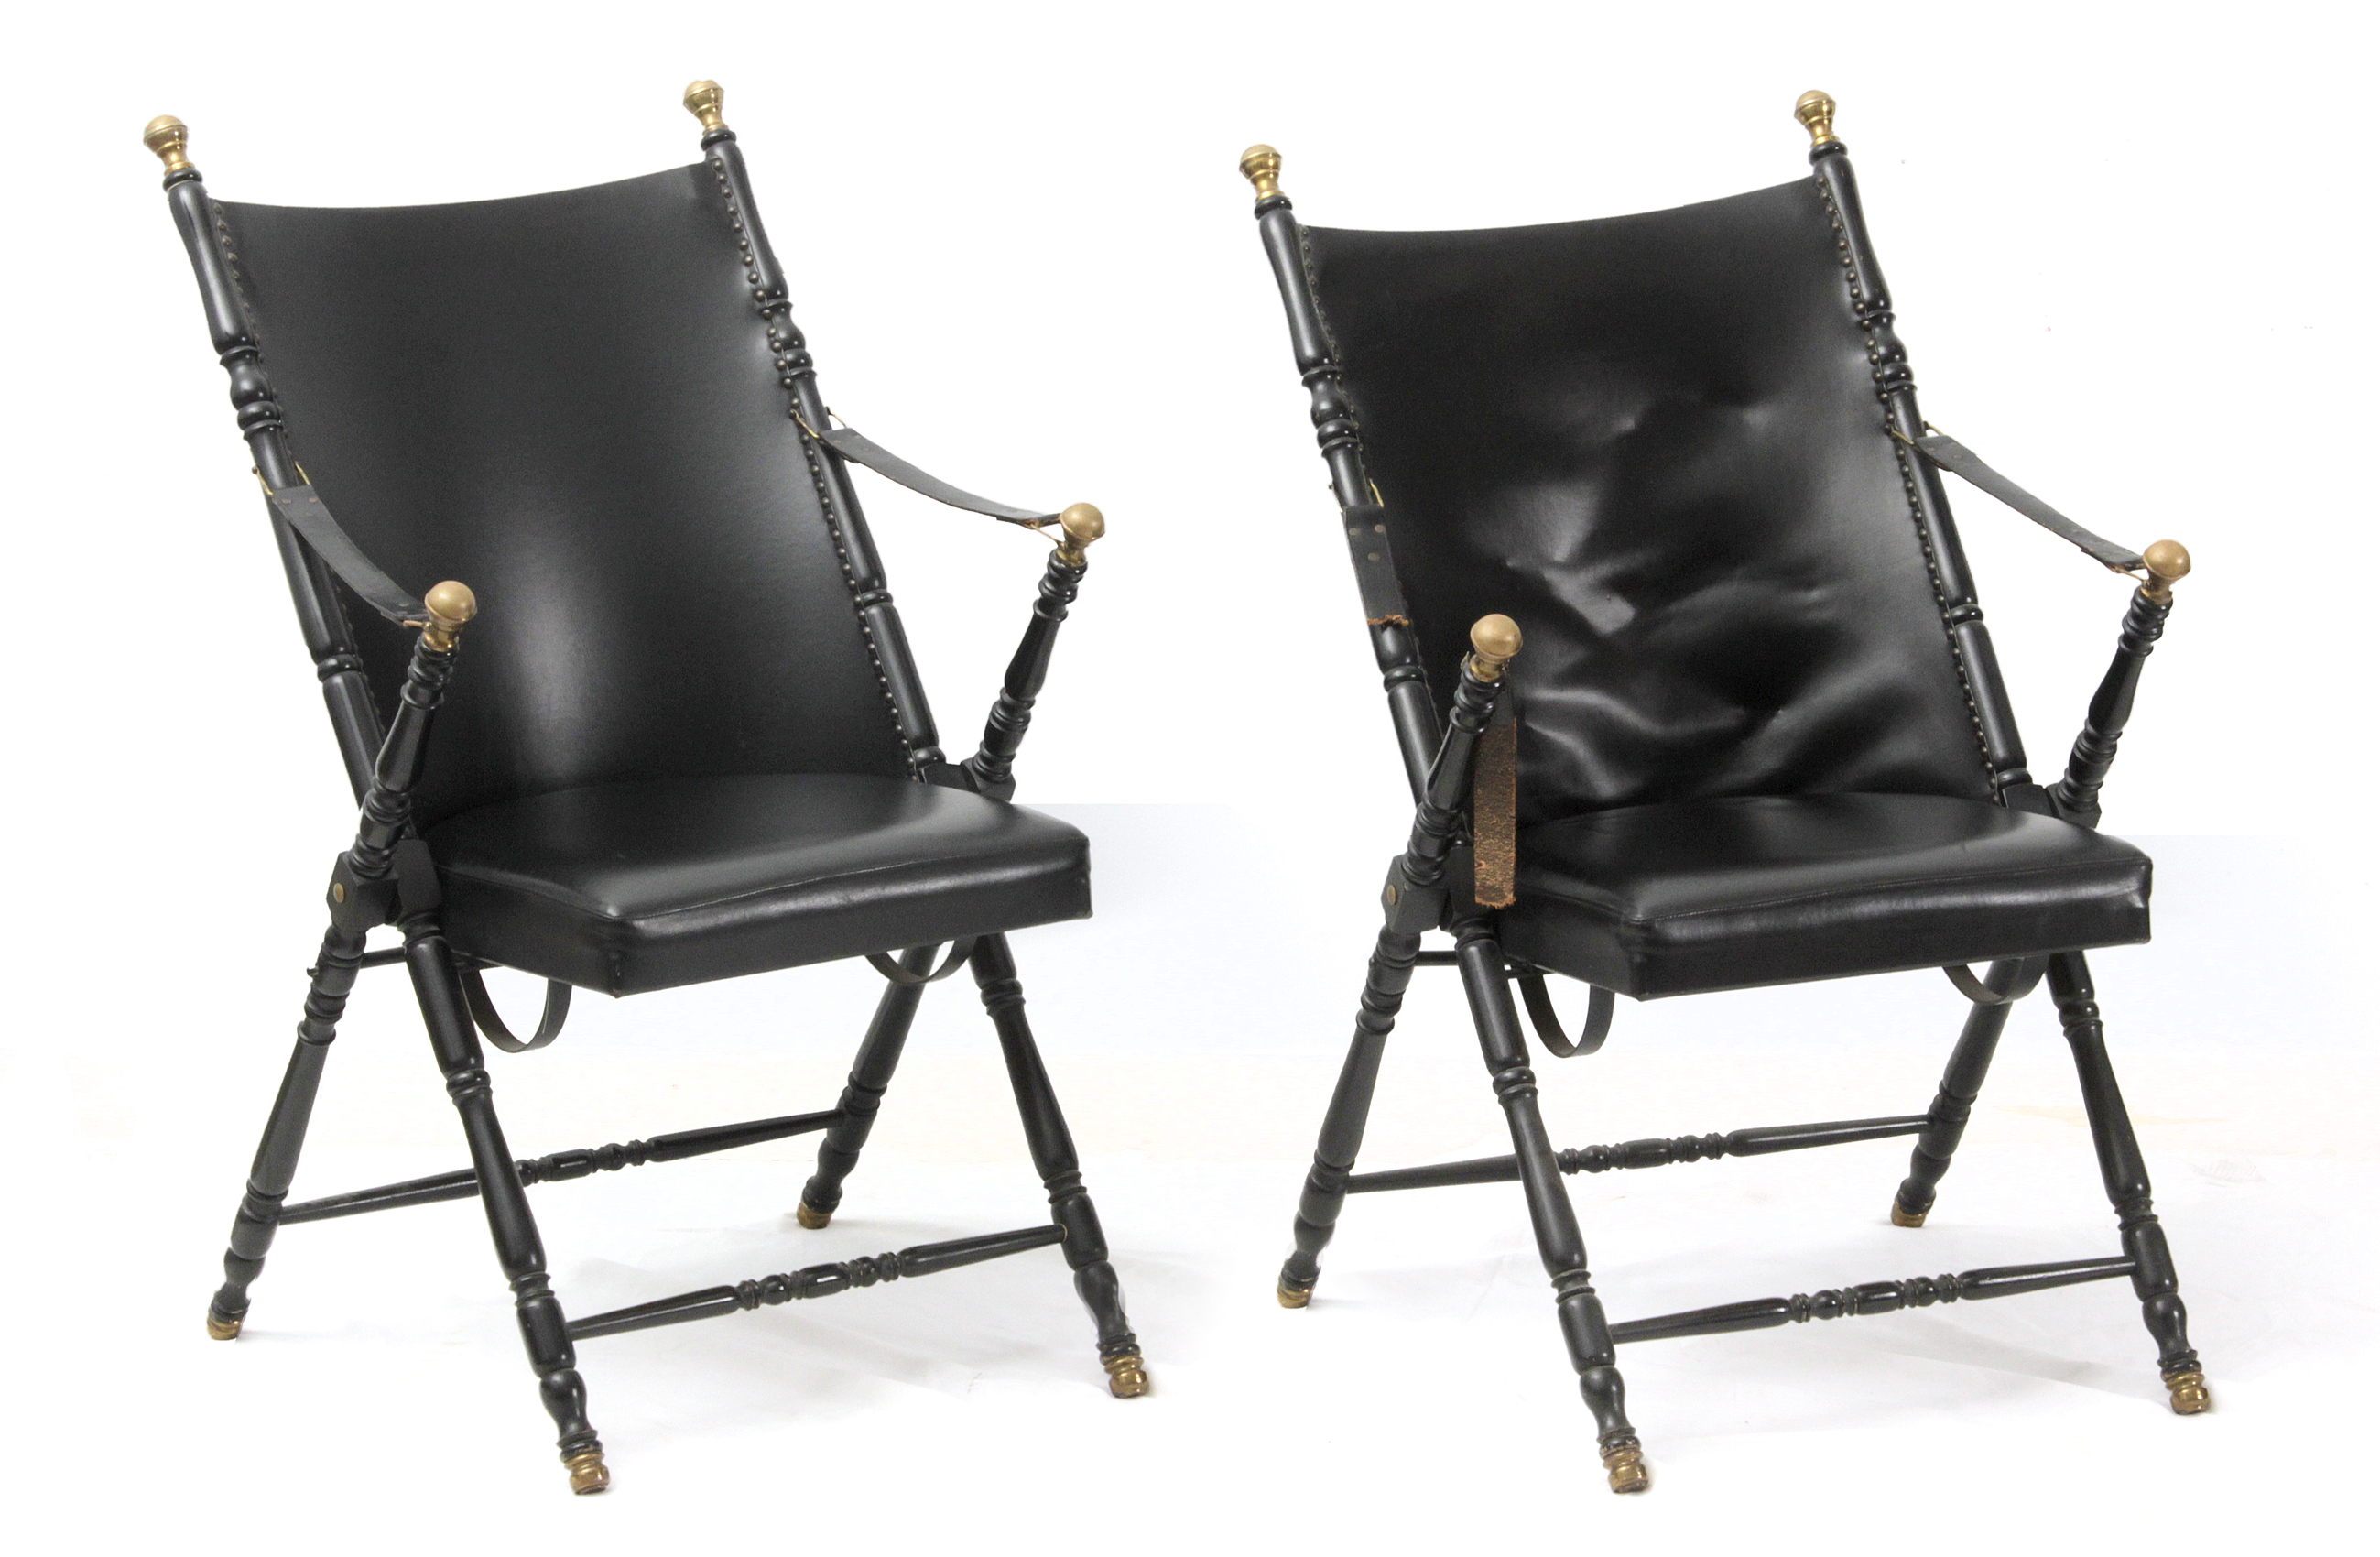 A pair of 20th century armchairs in lacquered wood with leather upholstery